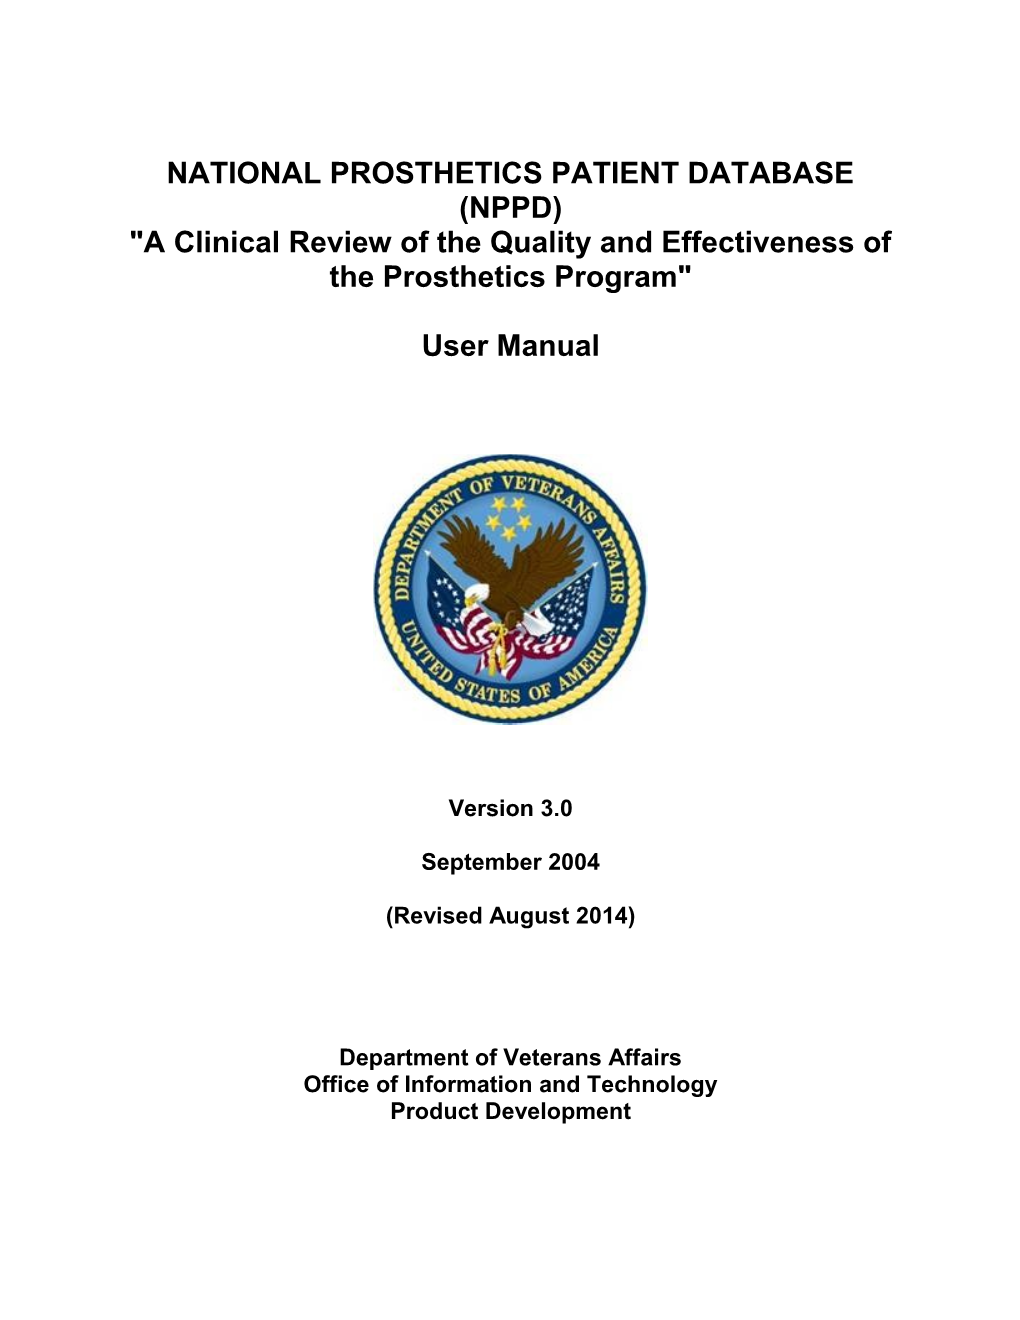 NATIONAL PROSTHETICS PATIENT DATABASE (NPPD) User Manual